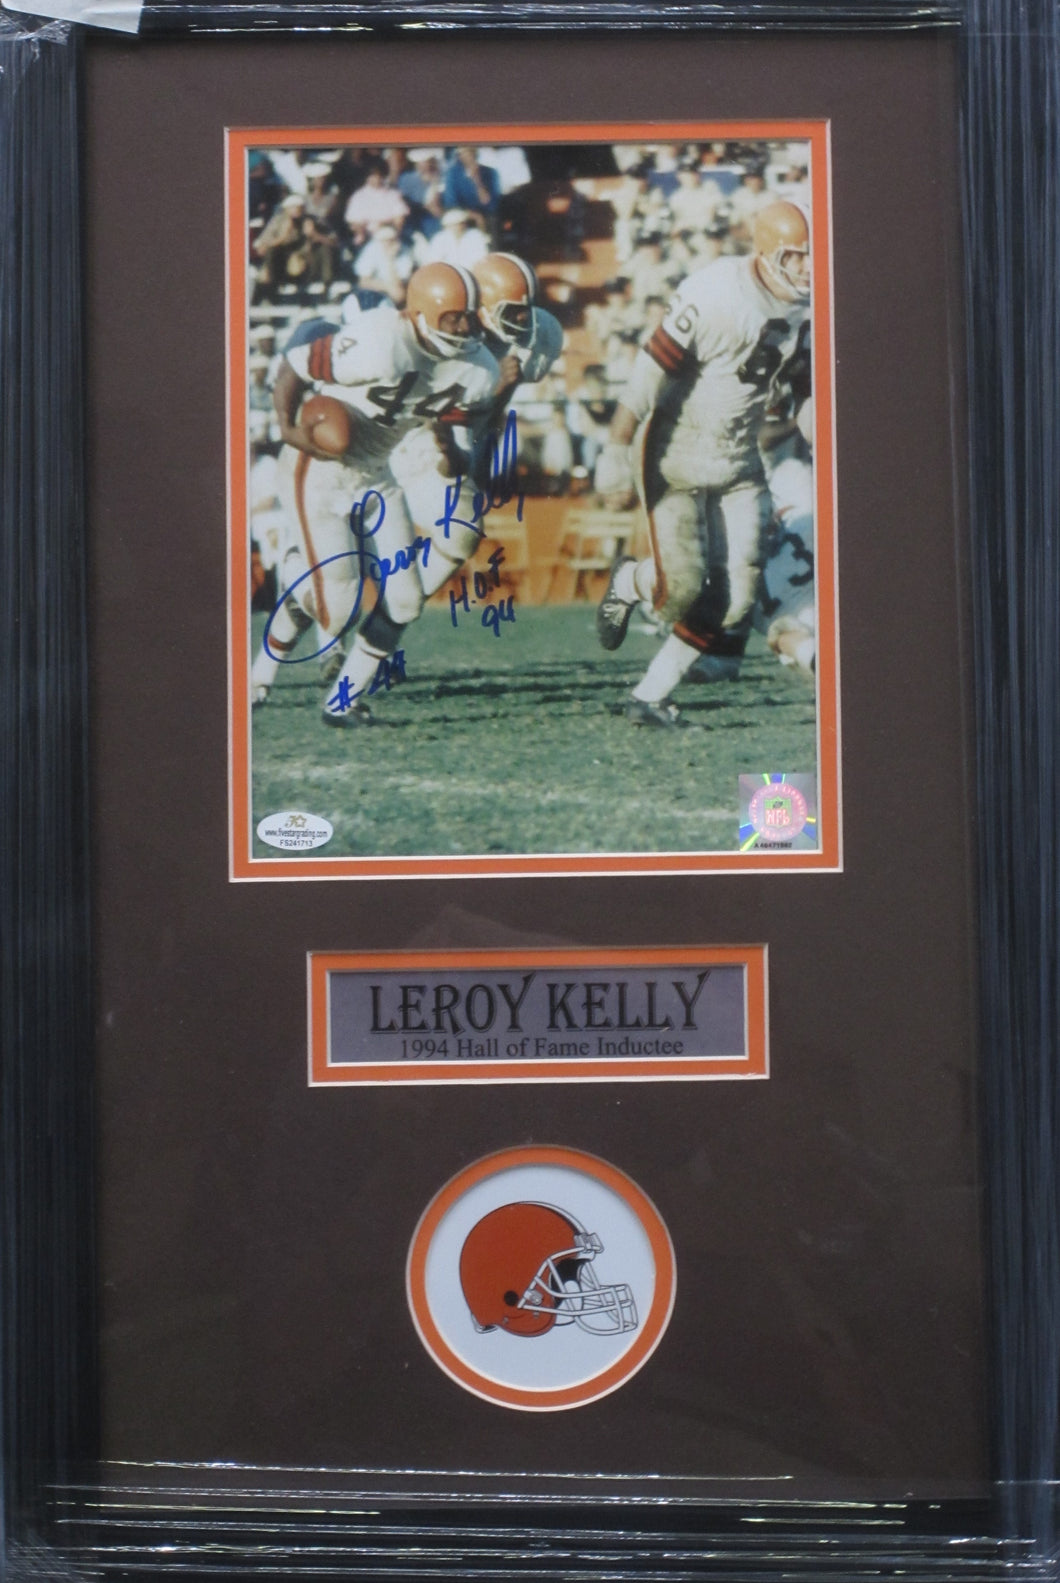 Cleveland Browns Leroy Kelly Signed 8x10 Photo with H.O.F 94 Inscription Framed & Matted with COA